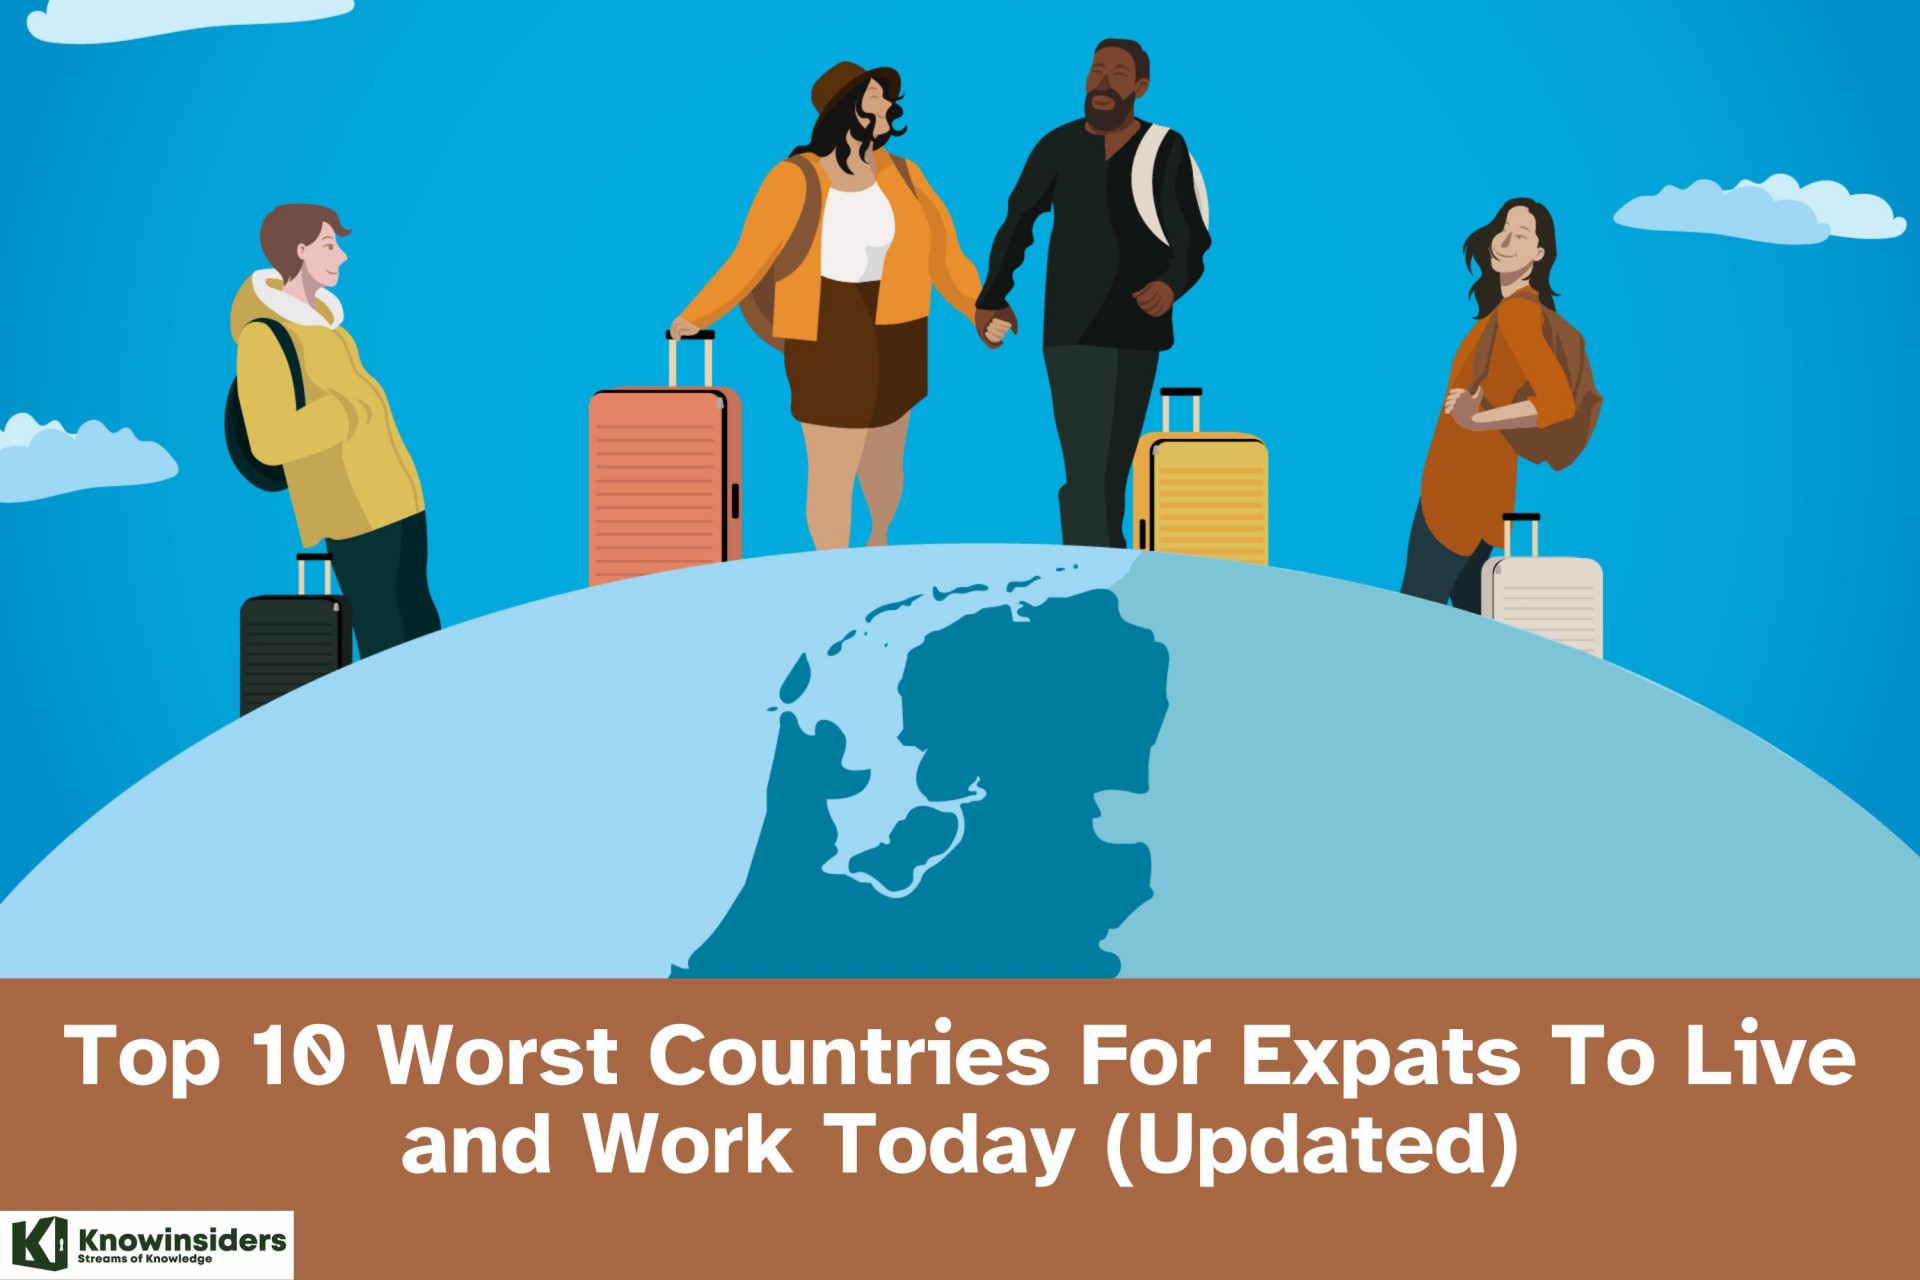 Top 10 Worst Countries For Expats To Live and Work Today